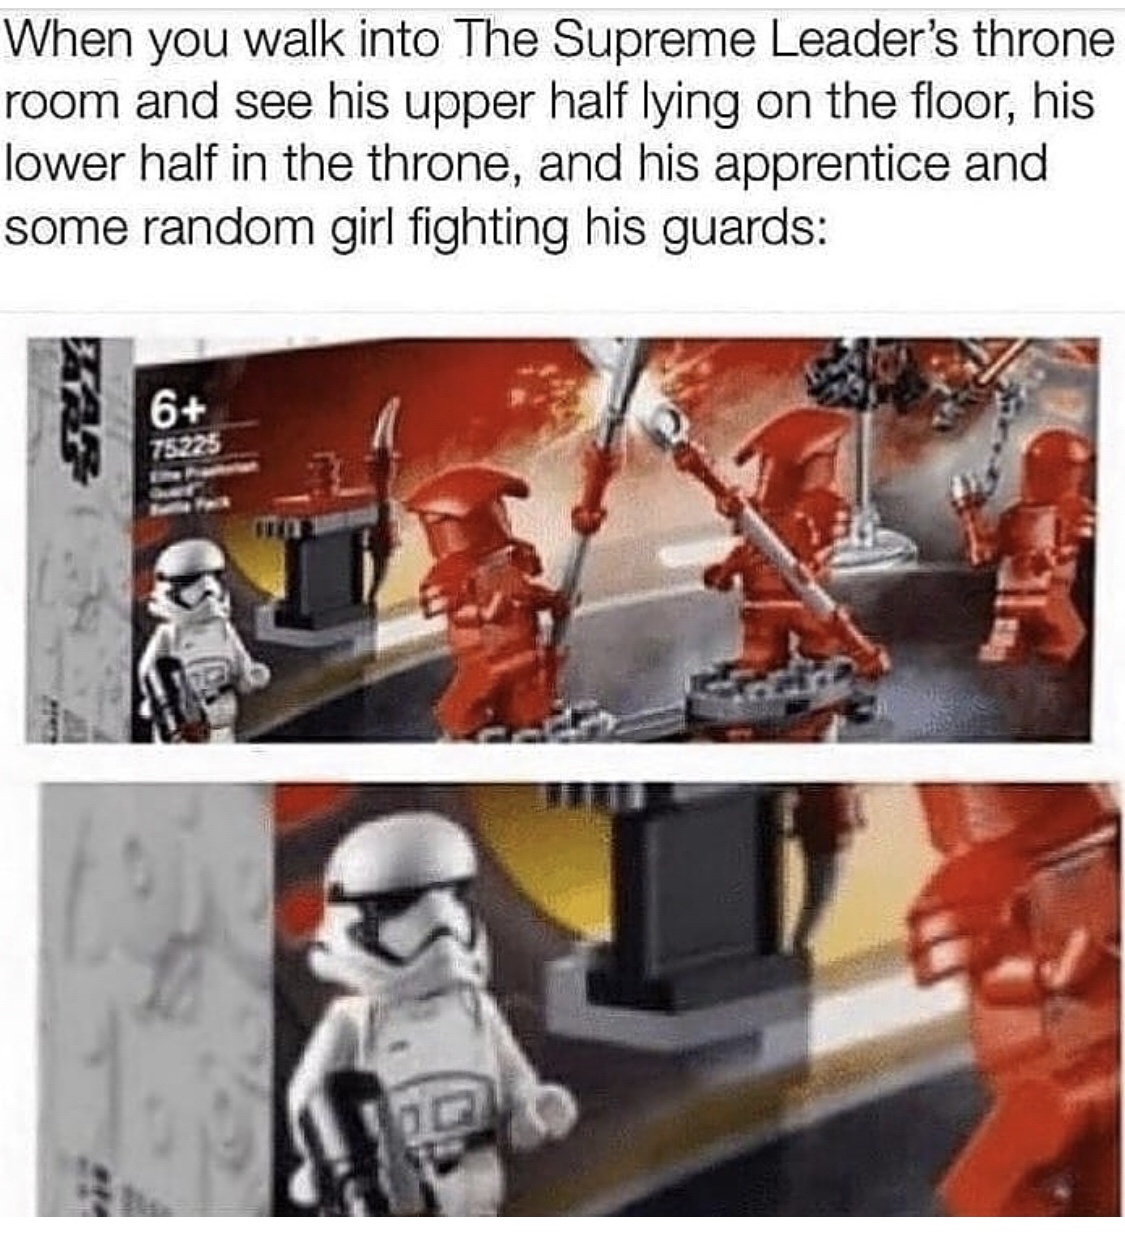 lego 75225 meme - When you walk into The Supreme Leader's throne room and see his upper half lying on the floor, his lower half in the throne, and his apprentice and some random girl fighting his guards 6